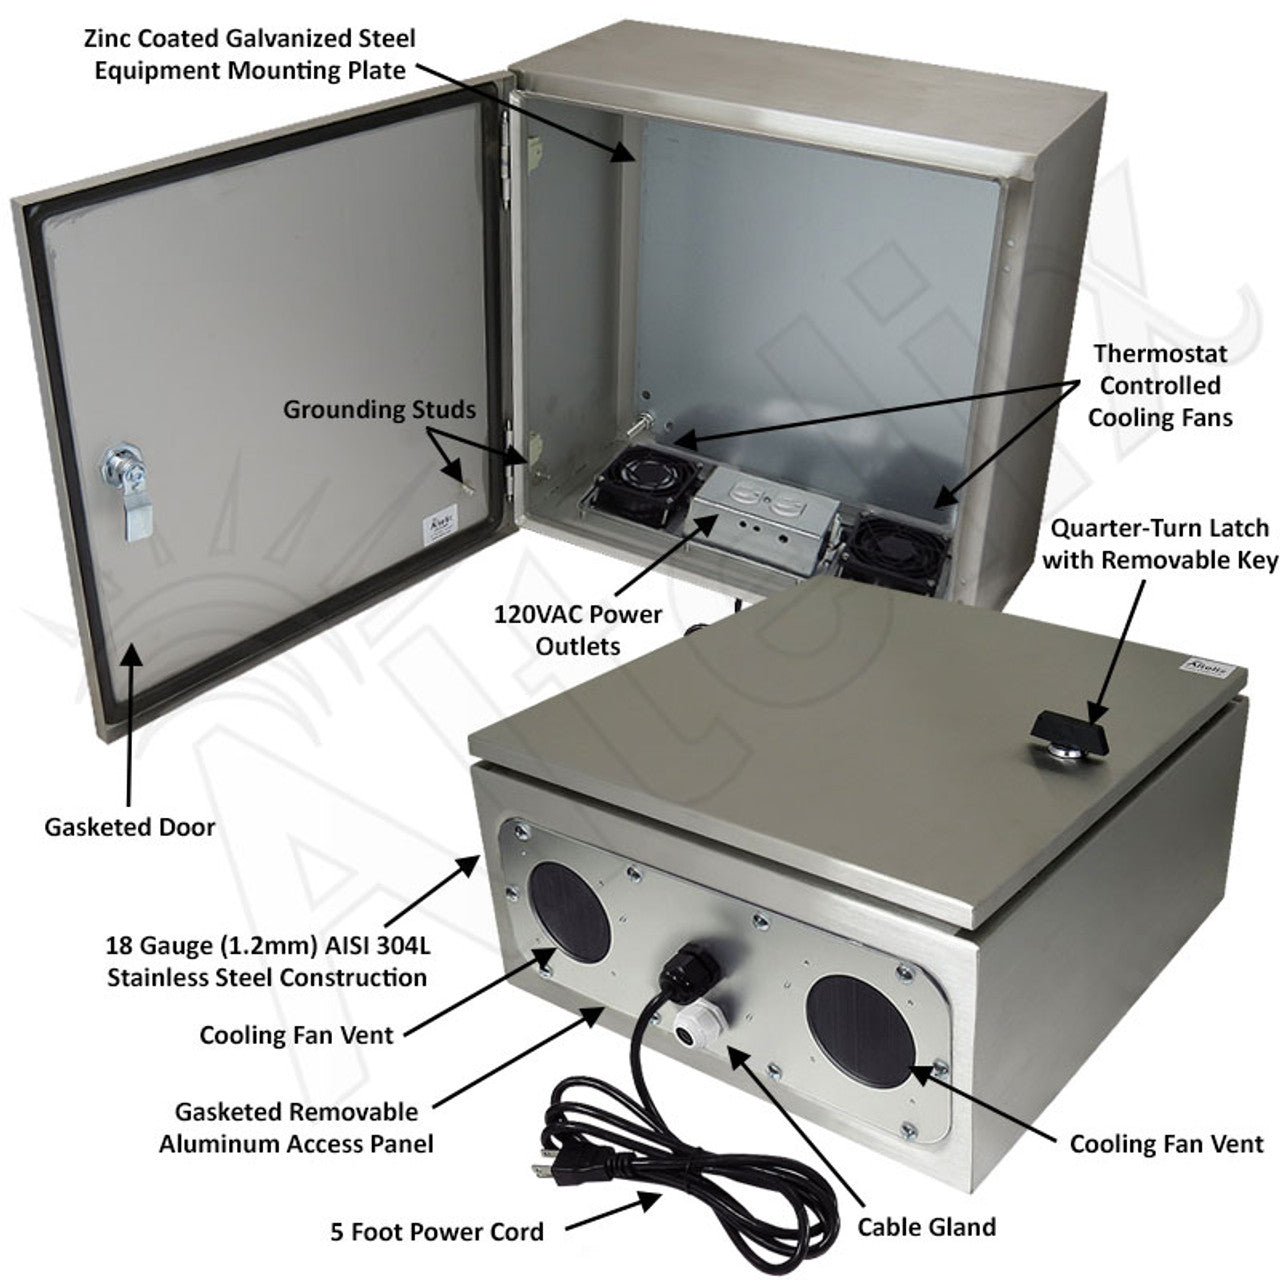 Altelix Stainless Steel Weatherproof NEMA Enclosure with Dual Cooling Fans, 120 VAC Outlets and Power Cord - 0